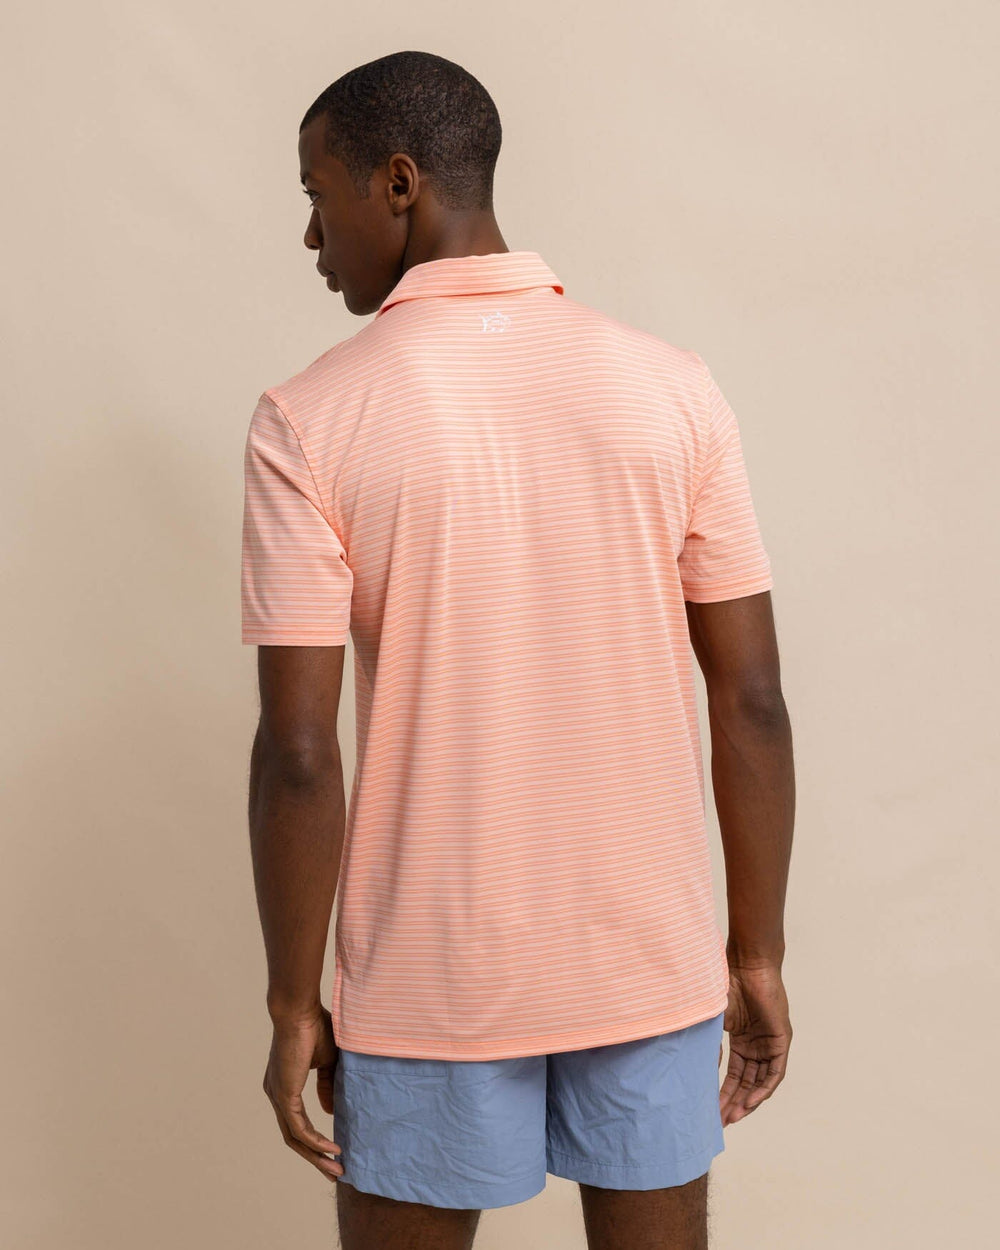 The back view of the Southern Tide brrr eeze Beattie Stripe Performance Polo by Southern Tide - Apricot Blush Coral